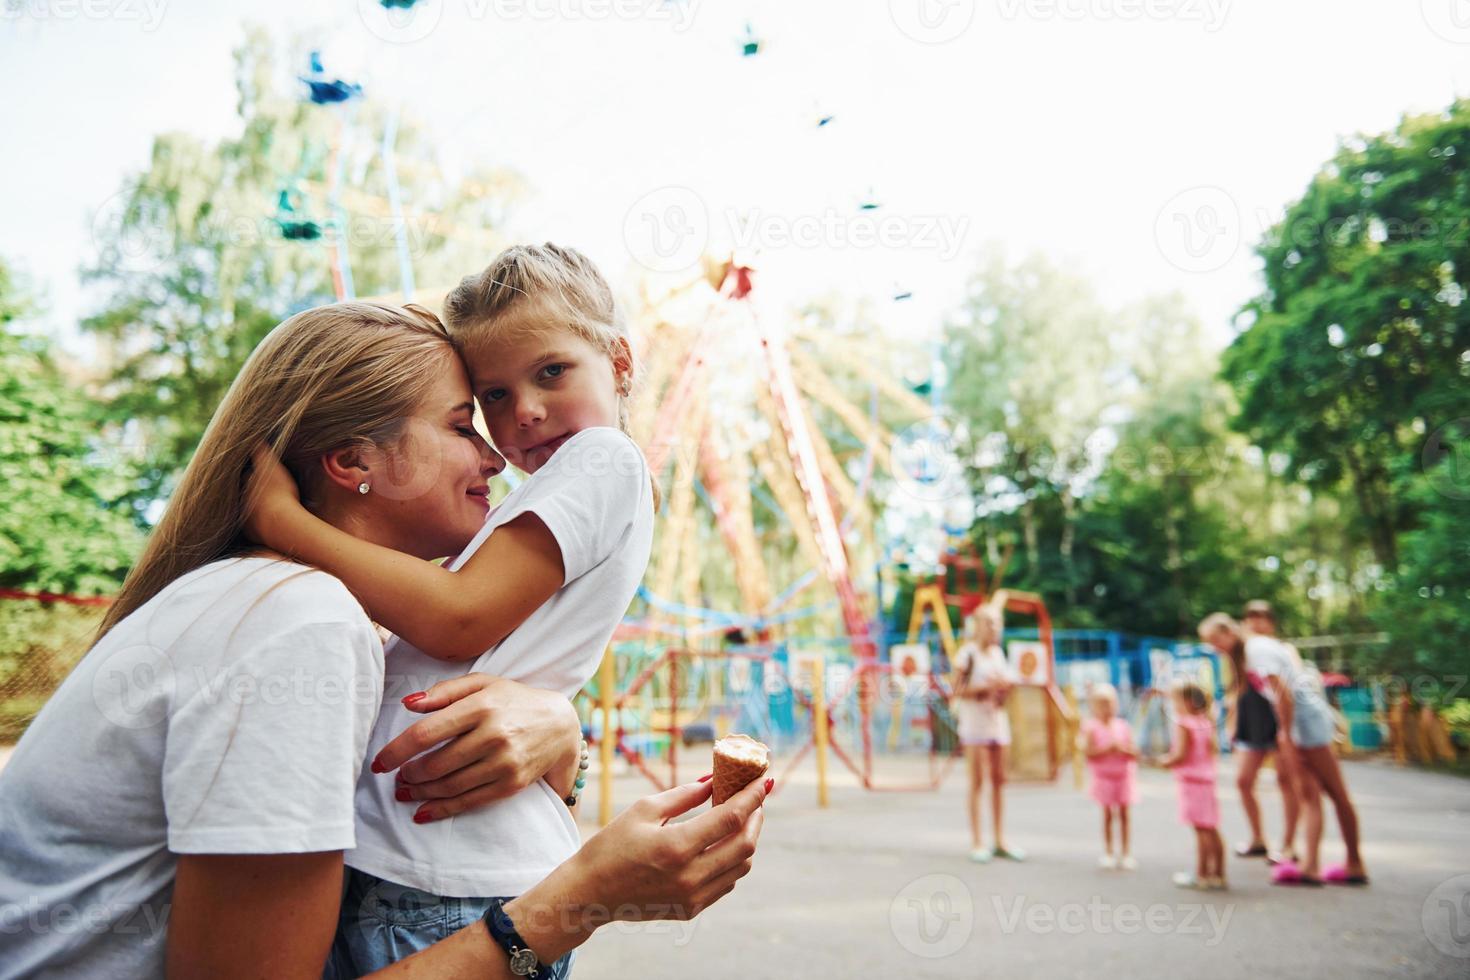 Eating ice cream. Cheerful little girl her mother have a good time in the park together near attractions photo